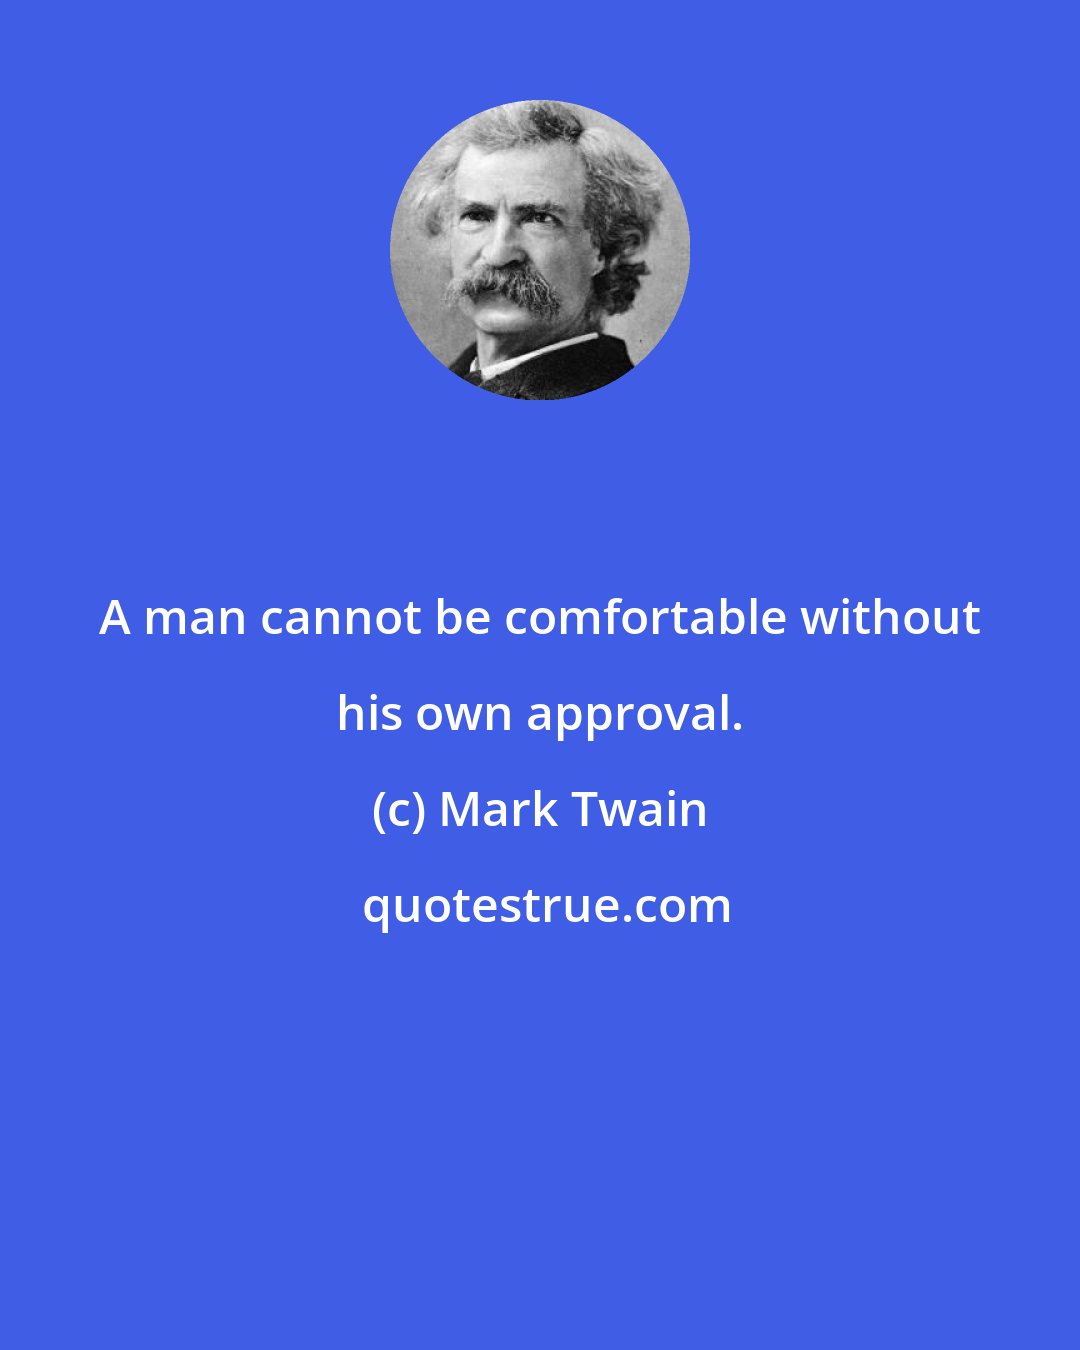 Mark Twain: A man cannot be comfortable without his own approval.